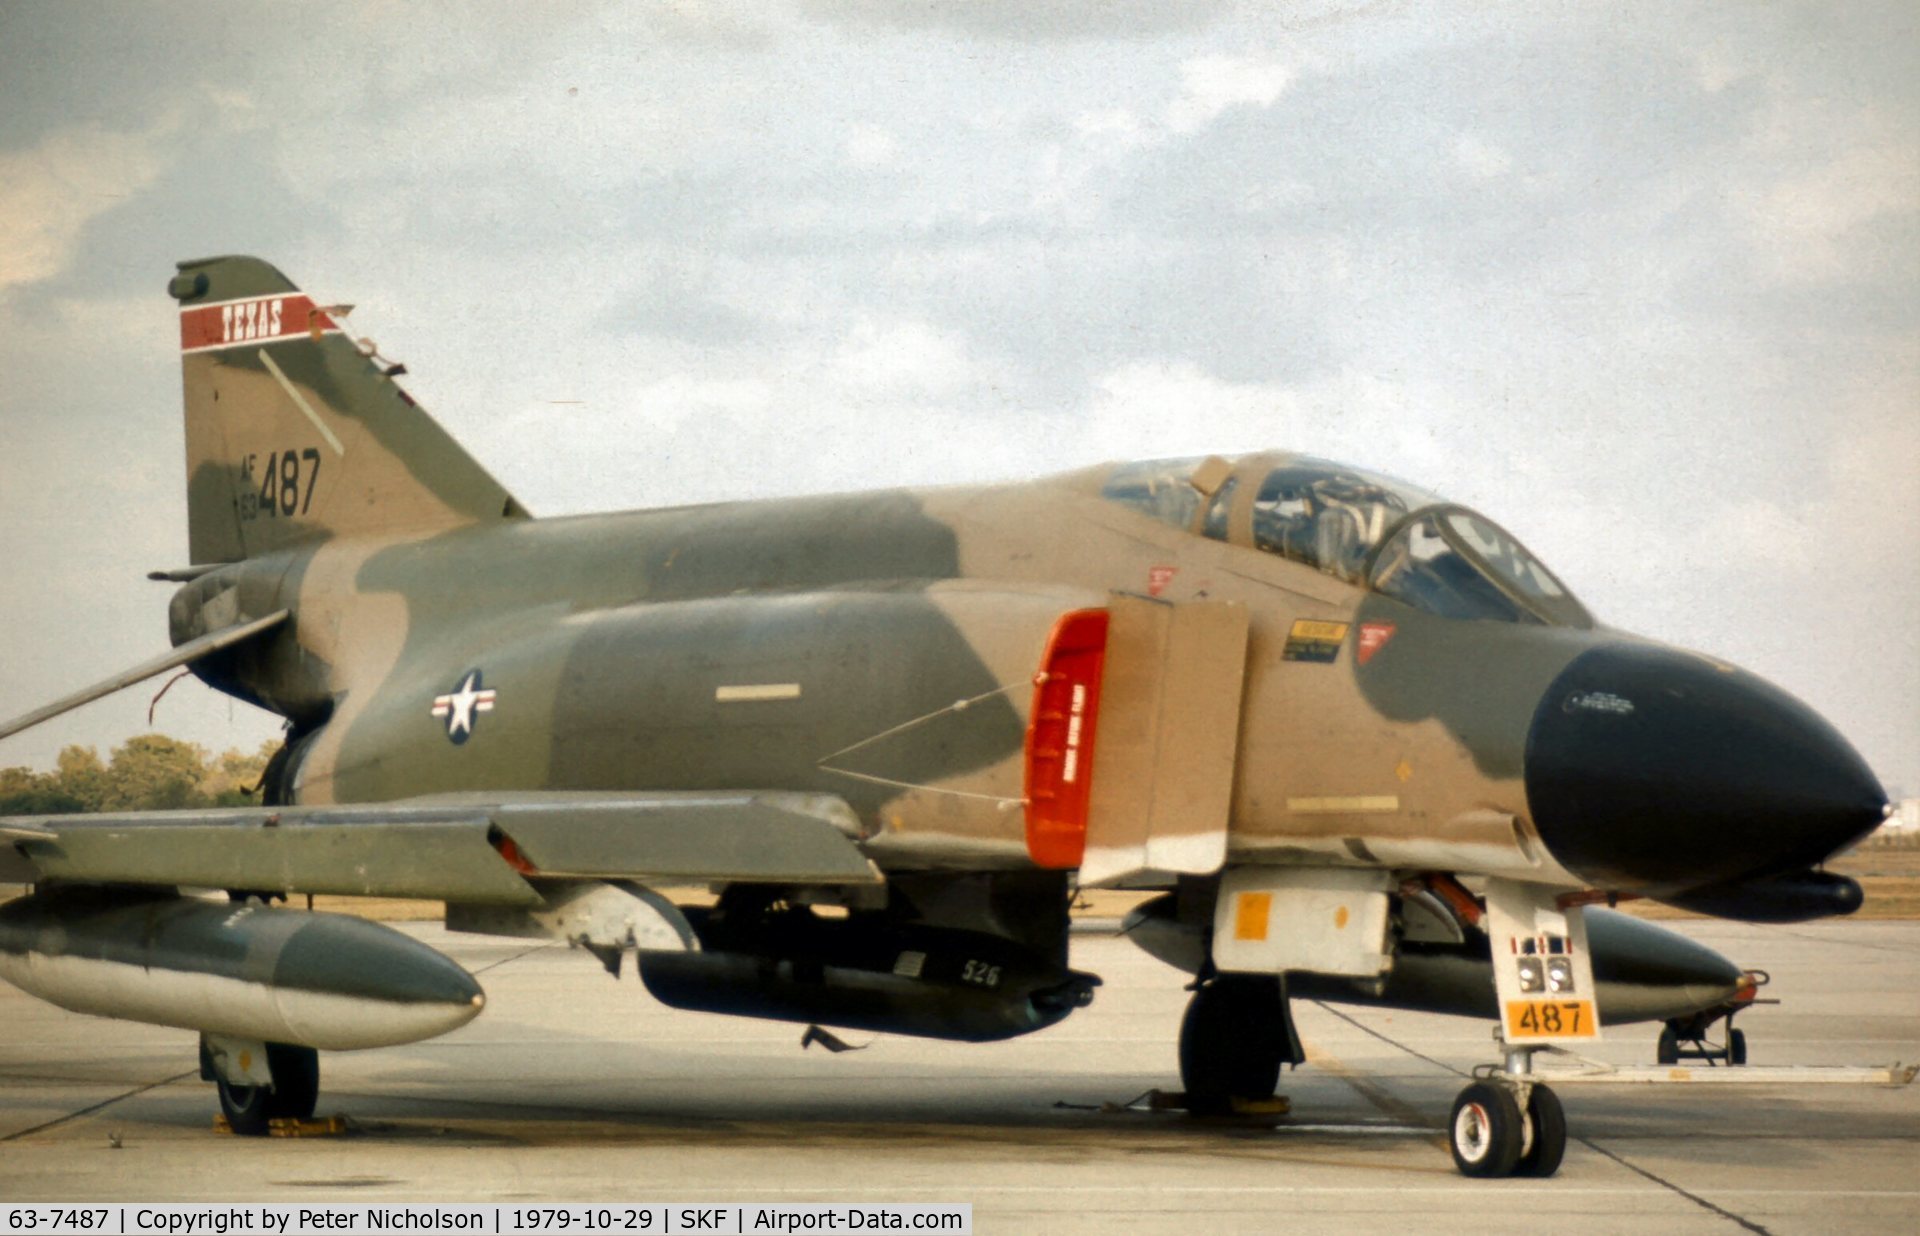 63-7487, 1963 McDonnell F-4C-18-MC Phantom II C/N 485, F-4C Phantom of 182nd Tactical Fighter Squadron/149th Tactical Fighter Group seen at Kelly AFB in October 1979.